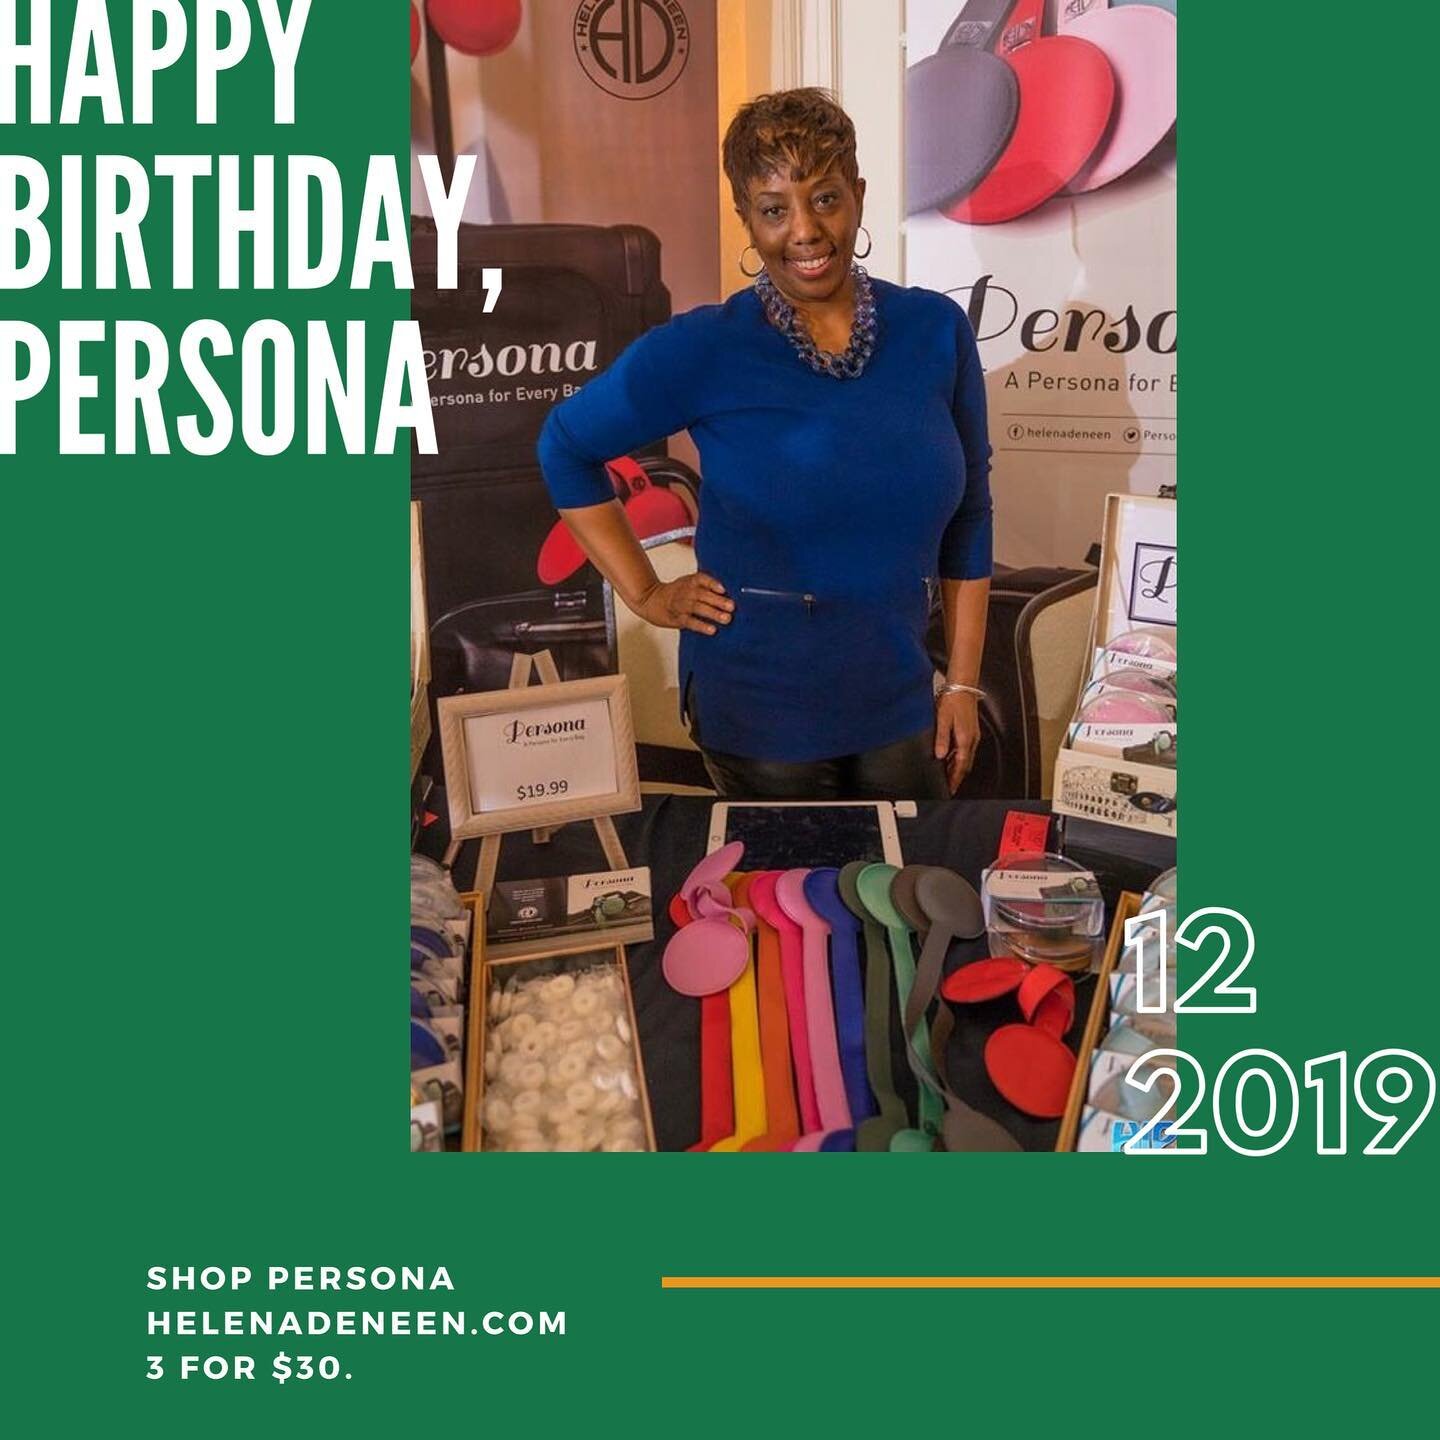 Happy Birthday to Helena Deneen - Persona for 3 years giving bags a personality, and customers a new experience identifying personal belongings. @personahd #luggage #travel #bag #bagidentifier #accessories #persona